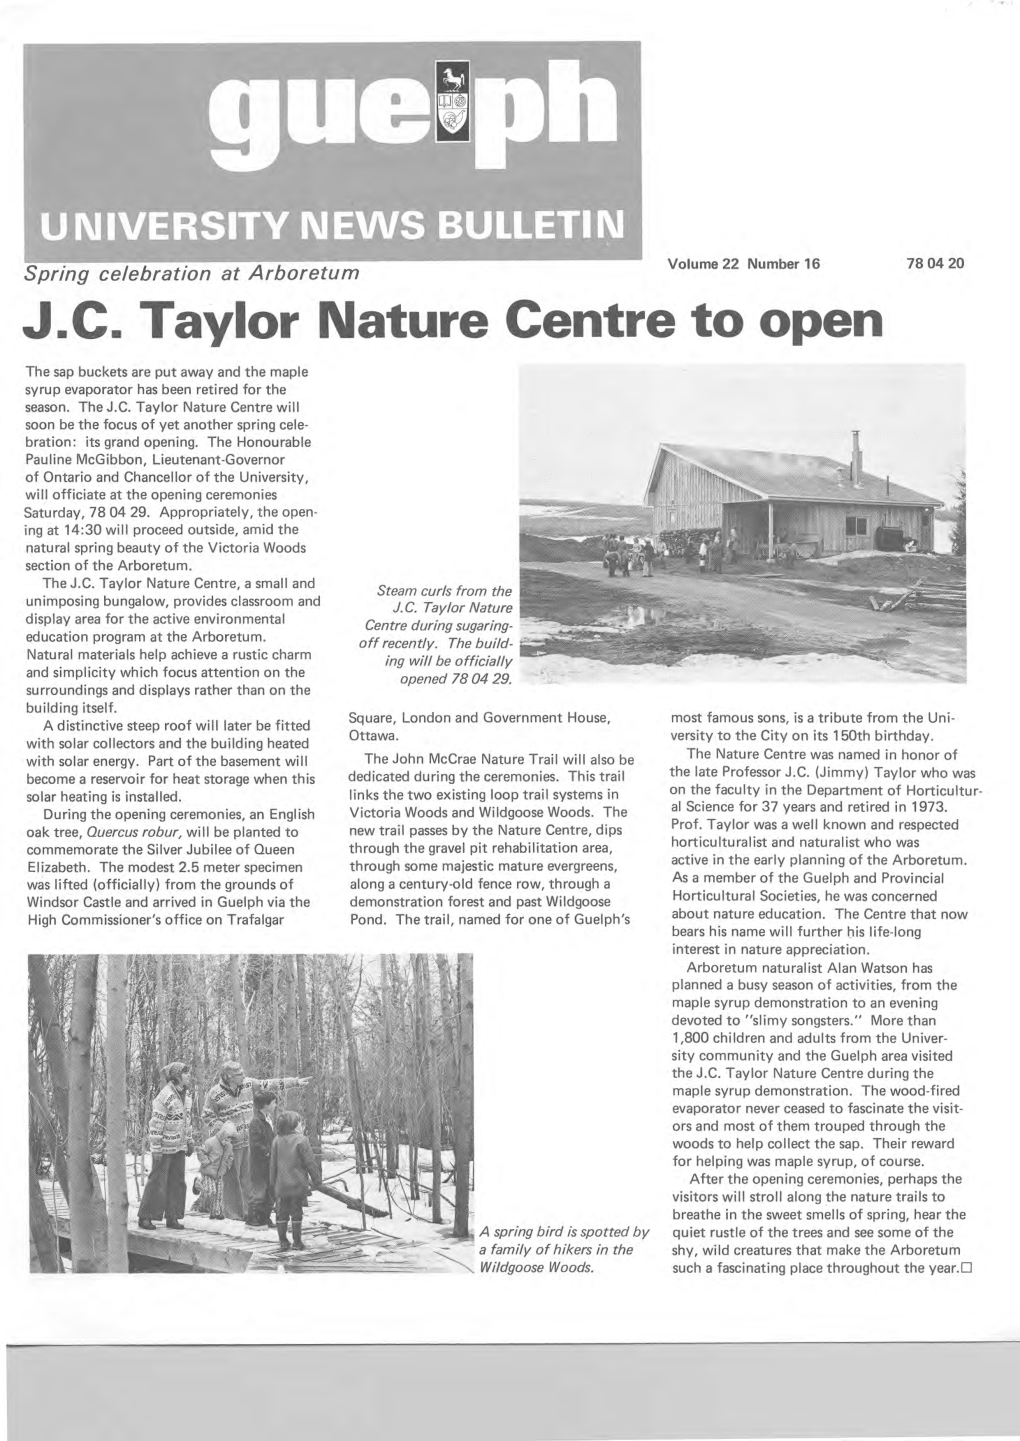 J.C. Taylor Nature Centre to Open